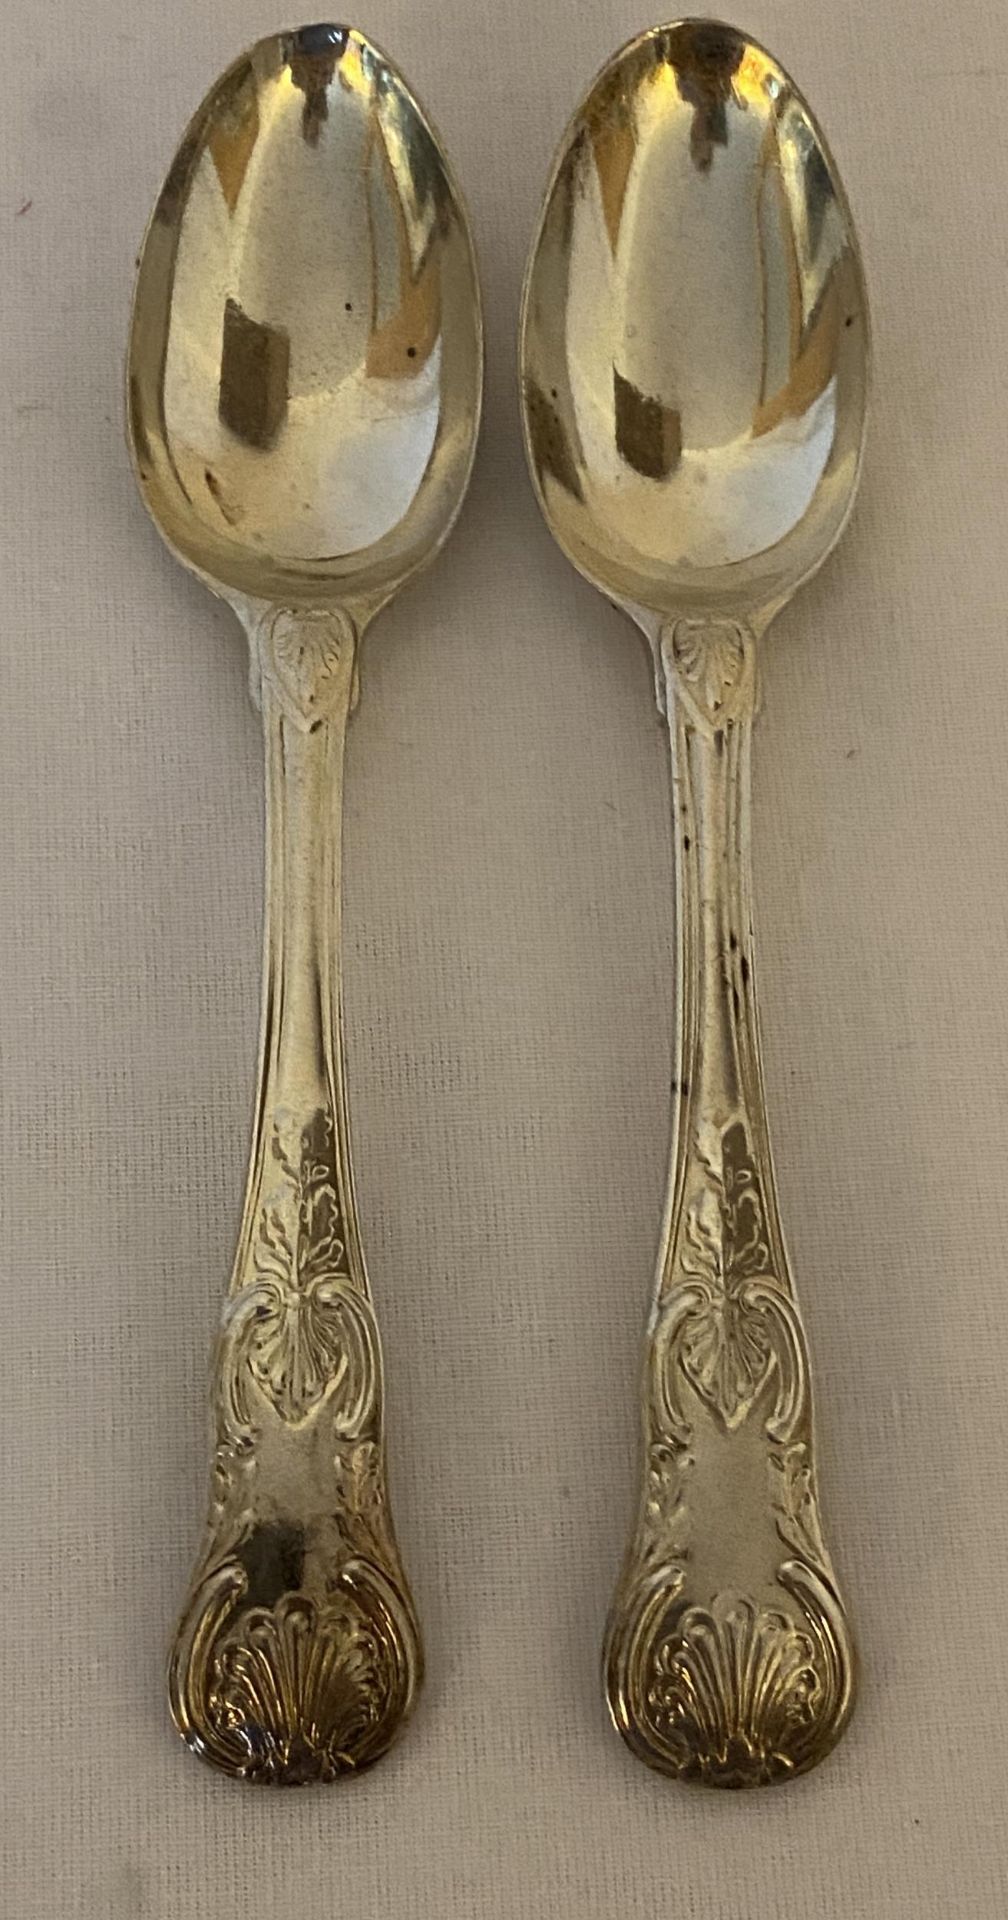 A PAIR OF WILLIAM IV 1832 HALLMARKED LONDON SILVER TEASPOONS, MAKER W.F, POSSIBLY WILLIAM